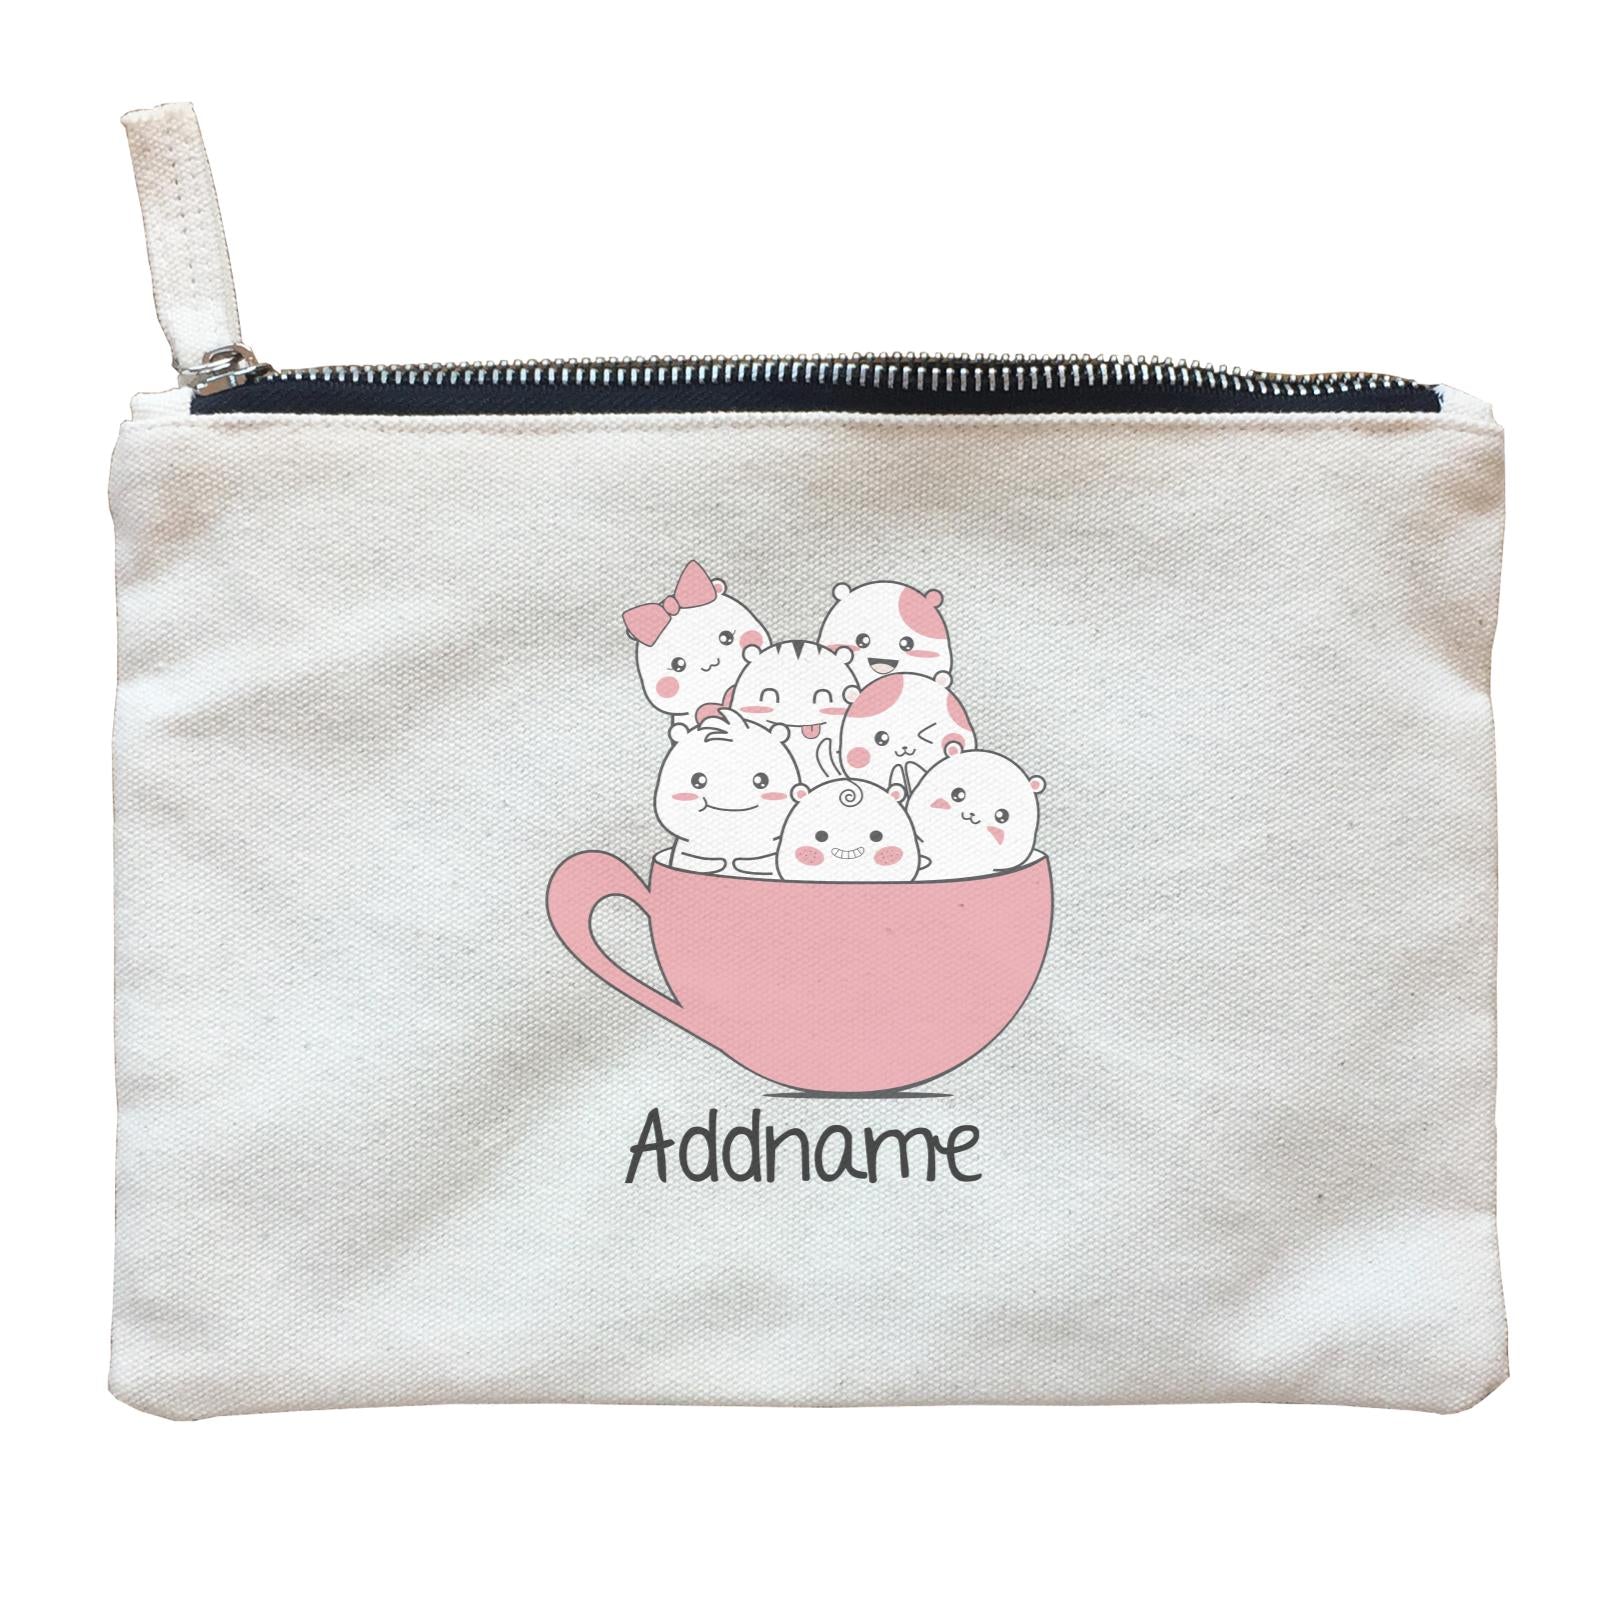 Cute Animals And Friends Series Cute Hamster Group Coffee Cup Addname Zipper Pouch